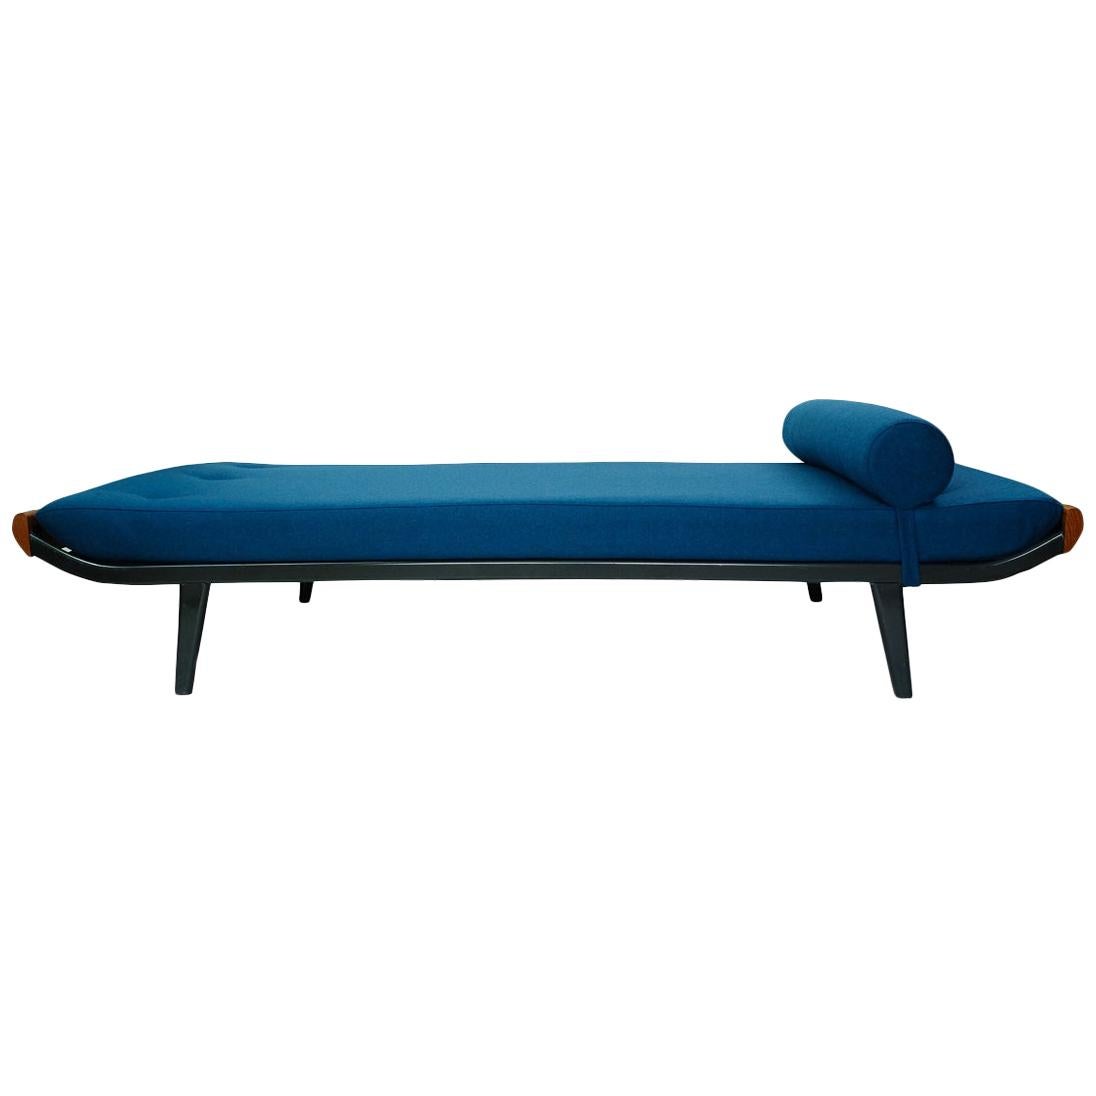 Cleopatra Daybed by Dick Cordemijer for Auping im Angebot